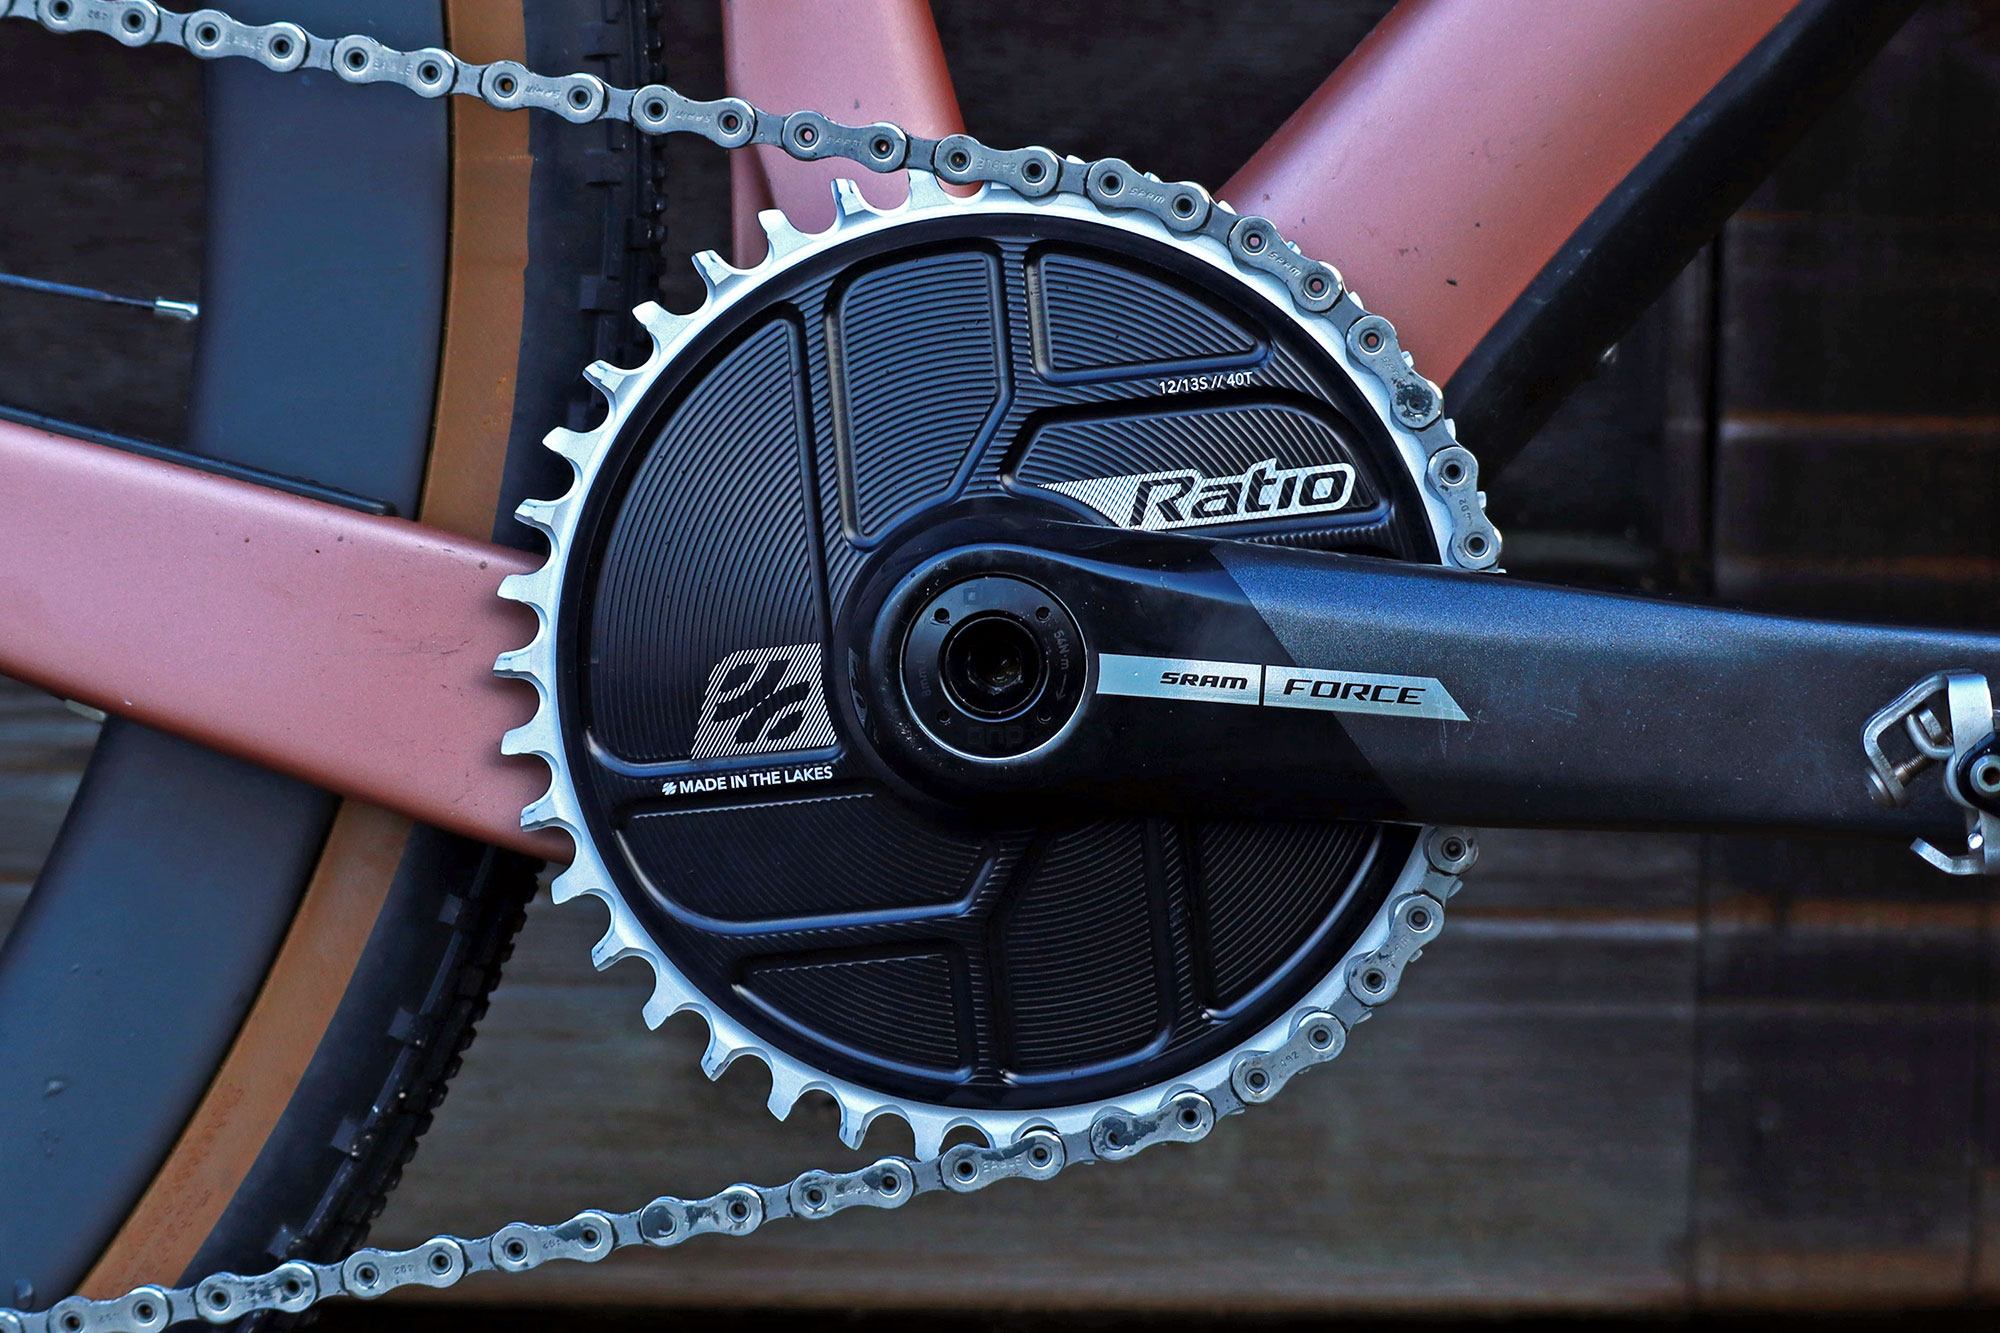 Ratio Direct Mount chainrings, spiderless aero 1x DM rings for 12 and 13-speed